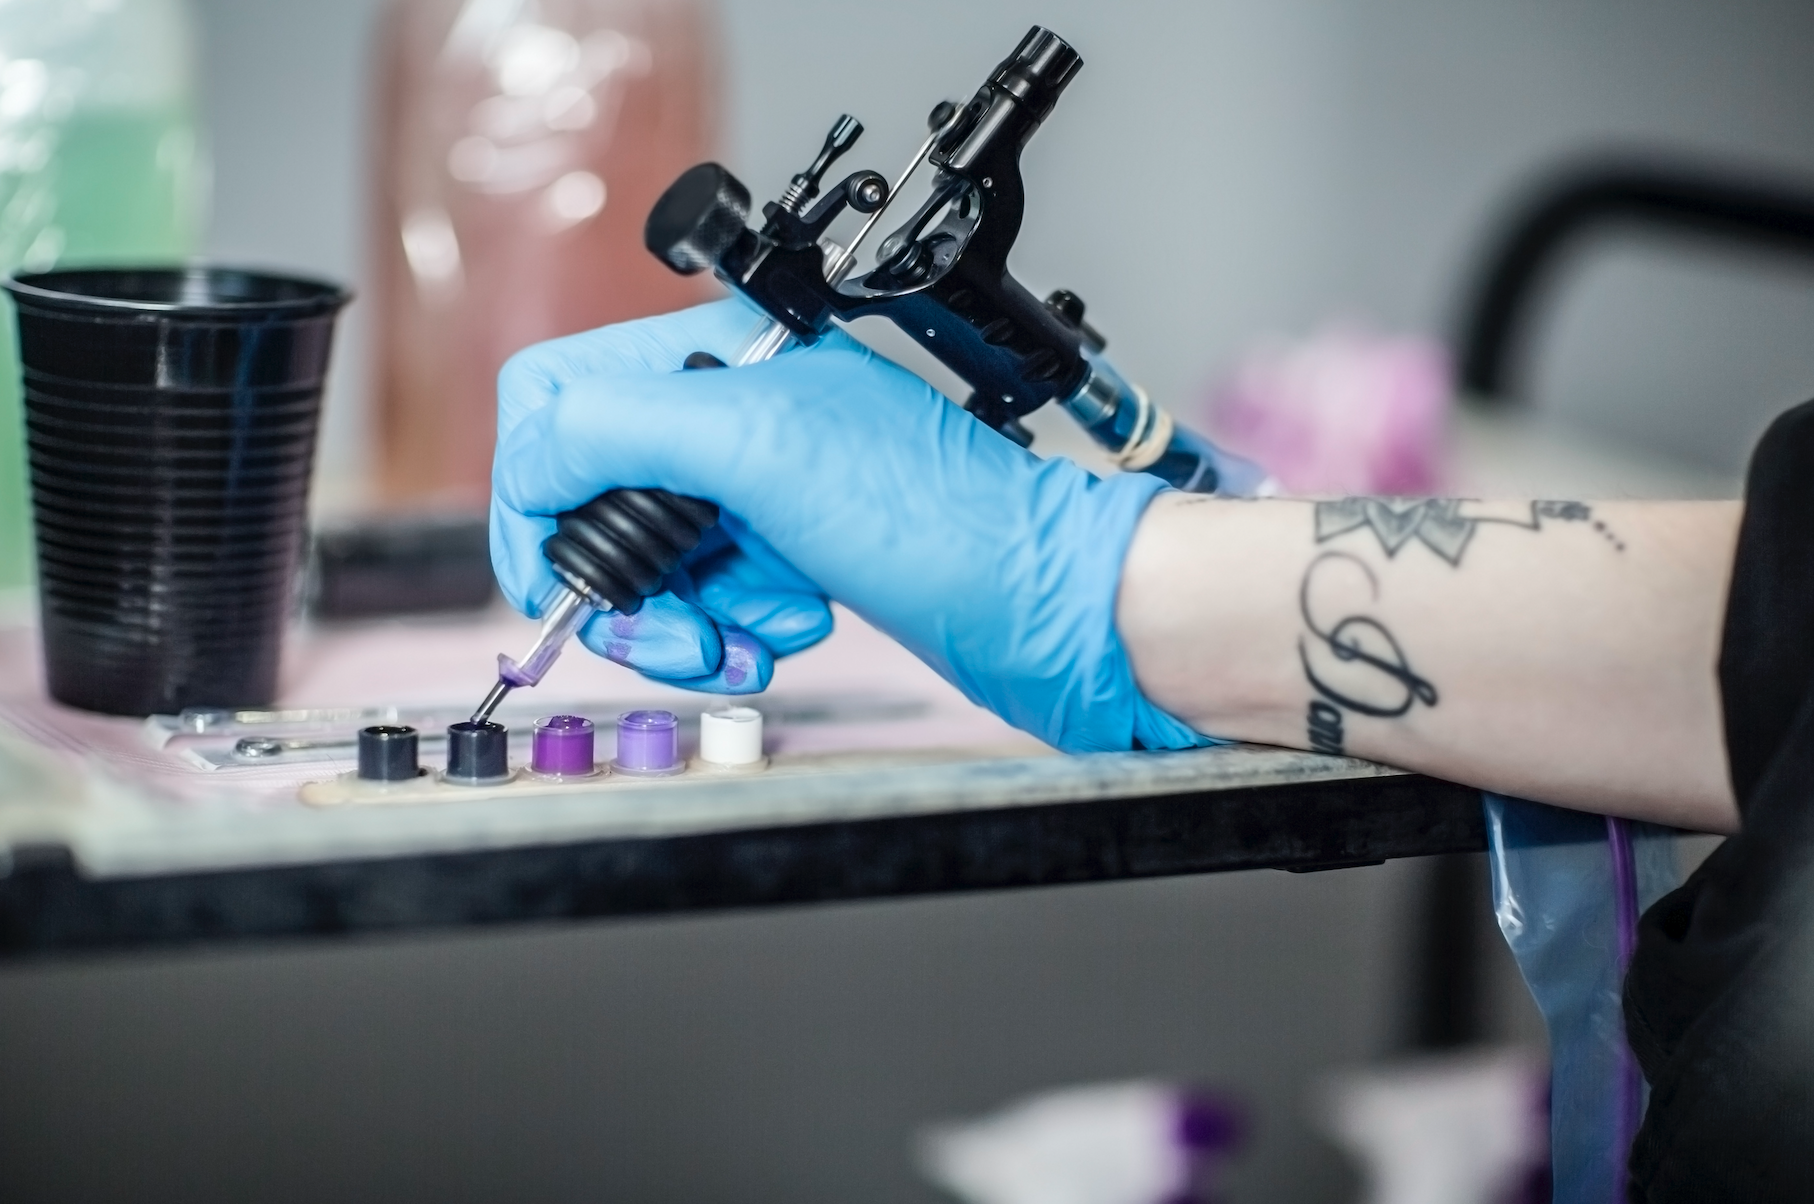 UK to investigate tattoo ink health risks after EU ban  Tattoos  The  Guardian